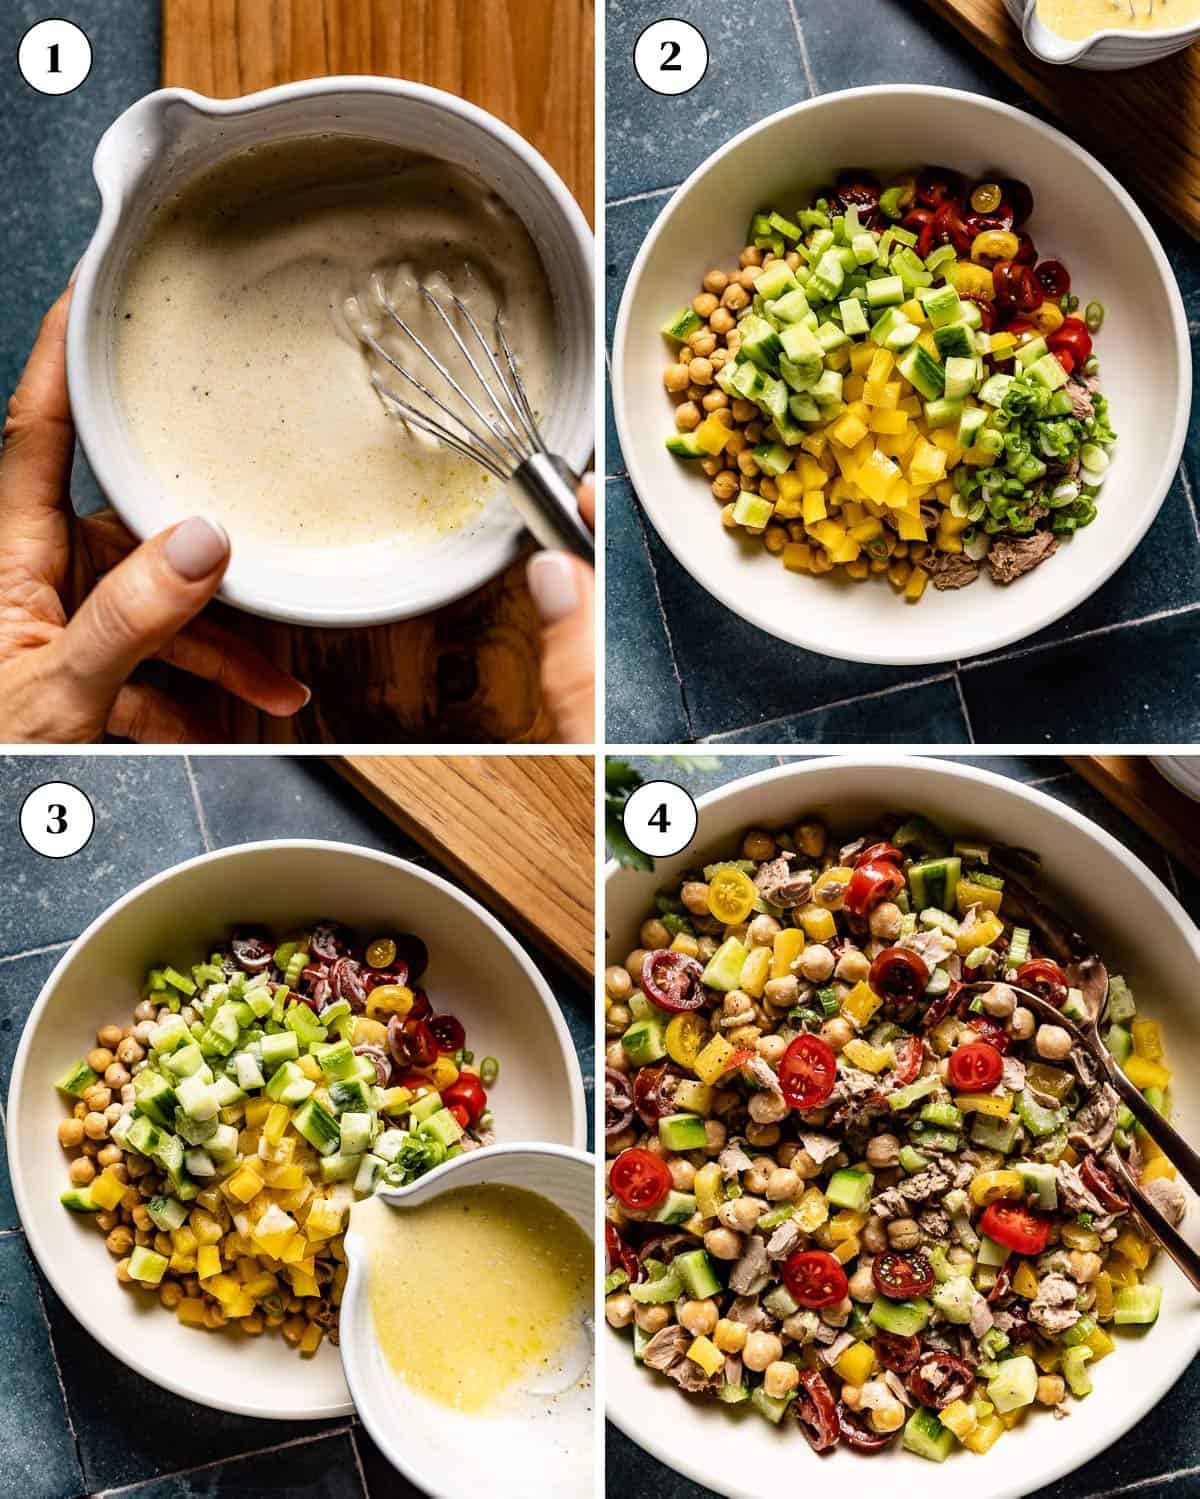 A collage of images showing how to make Tuna and chickpea salad.